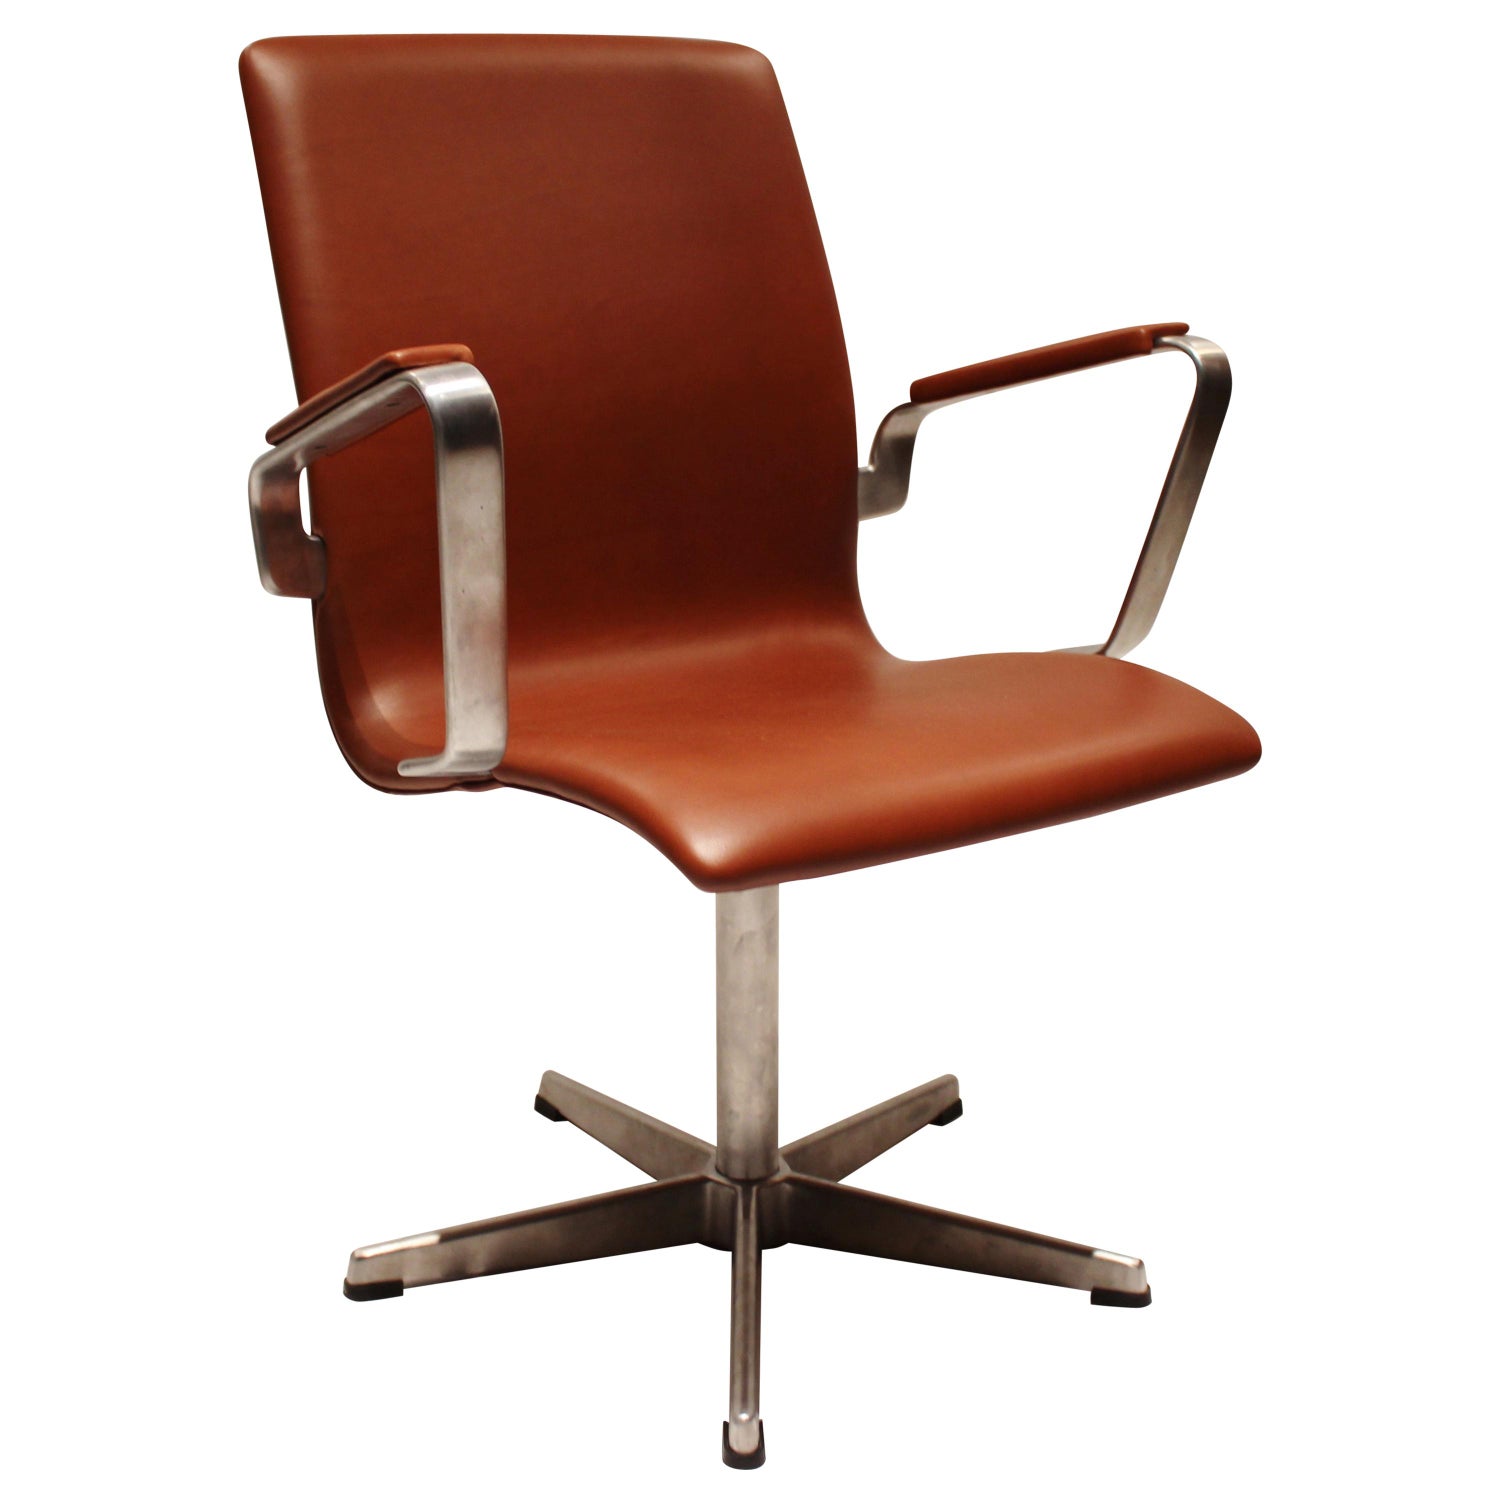 Oxford Classic Office Chair Model 3271 By Arne Jacobsen And